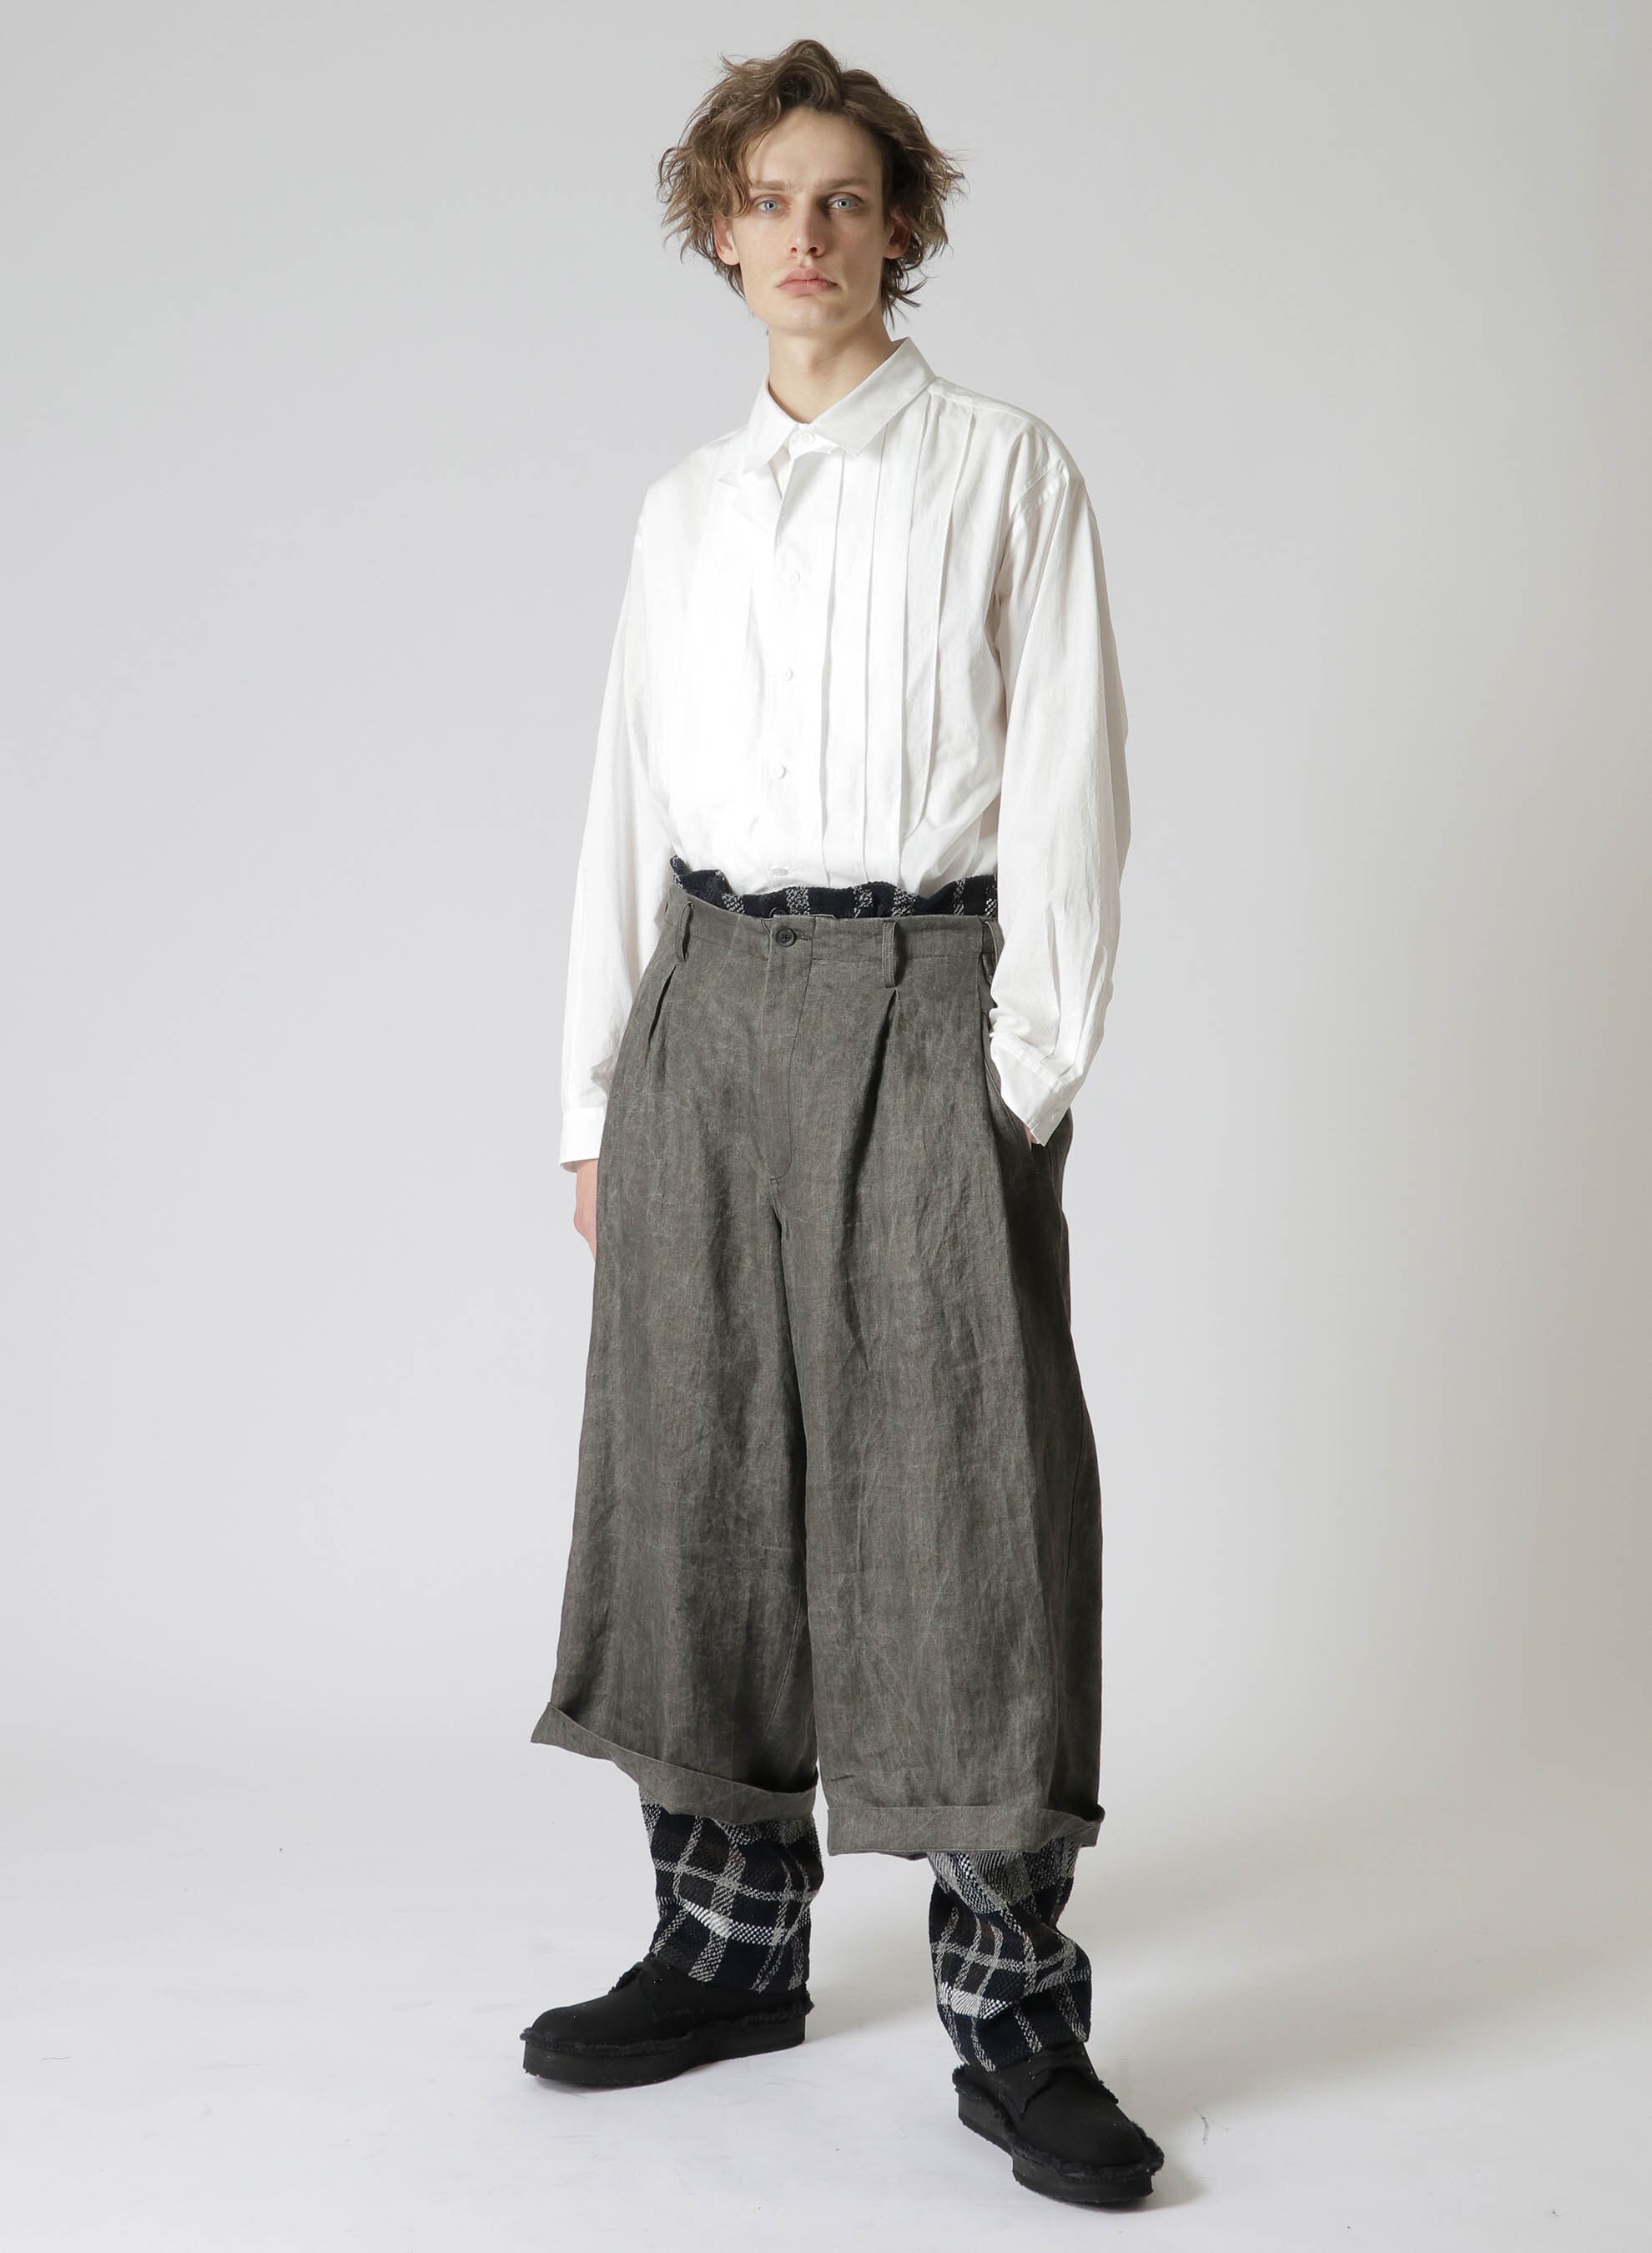 INK DYED TWILL LINEN CROPPED SUSPENDERS PANTS